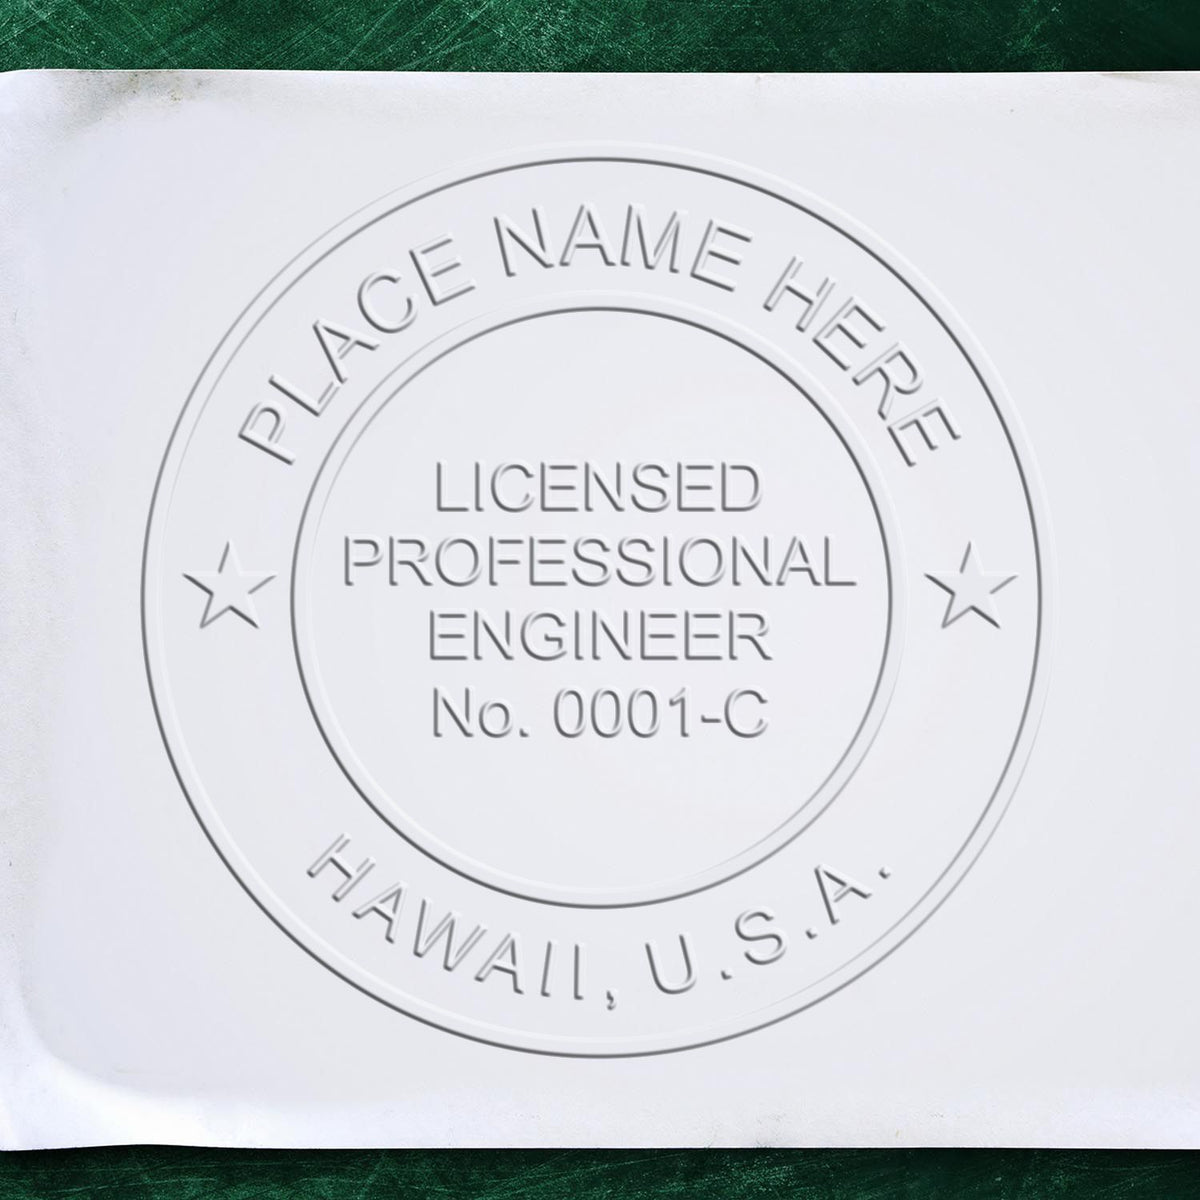 An alternative view of the Heavy Duty Cast Iron Hawaii Engineer Seal Embosser stamped on a sheet of paper showing the image in use